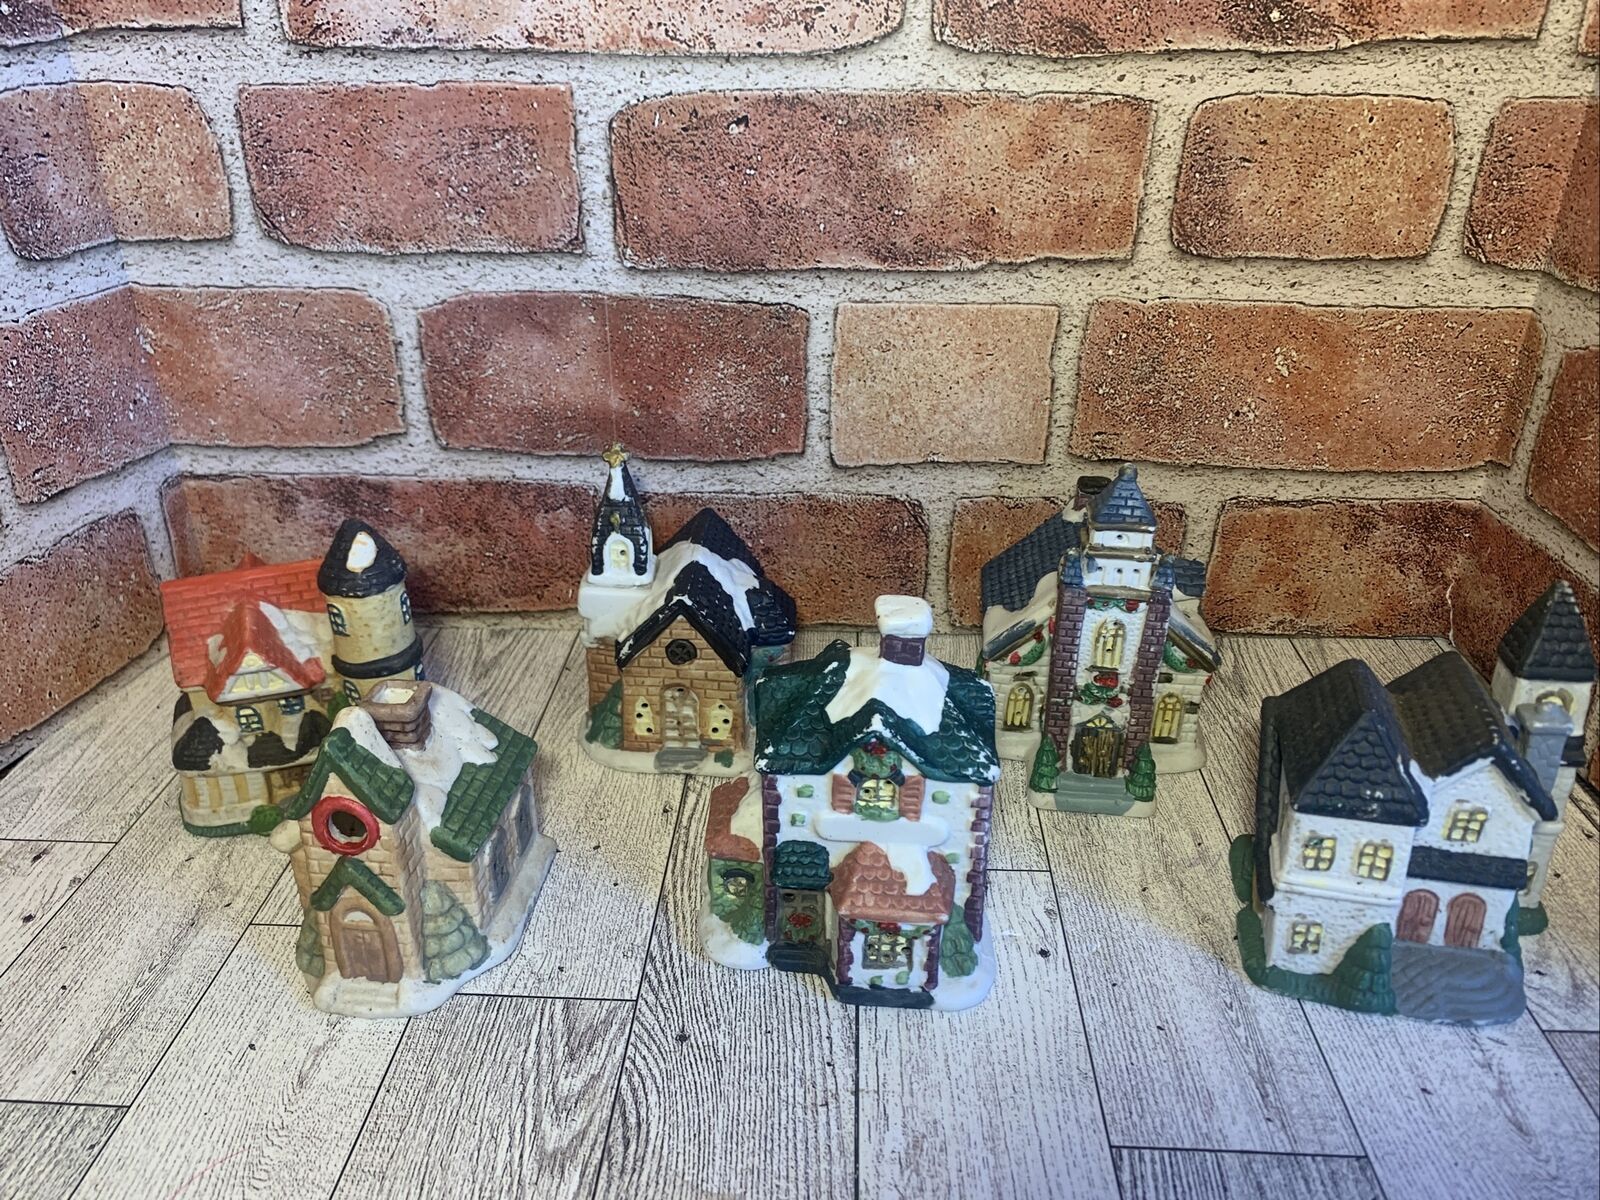 6pc Miniature Ceramic Christmas Village Great For Train Set Ups As Well 3.5-4.5”